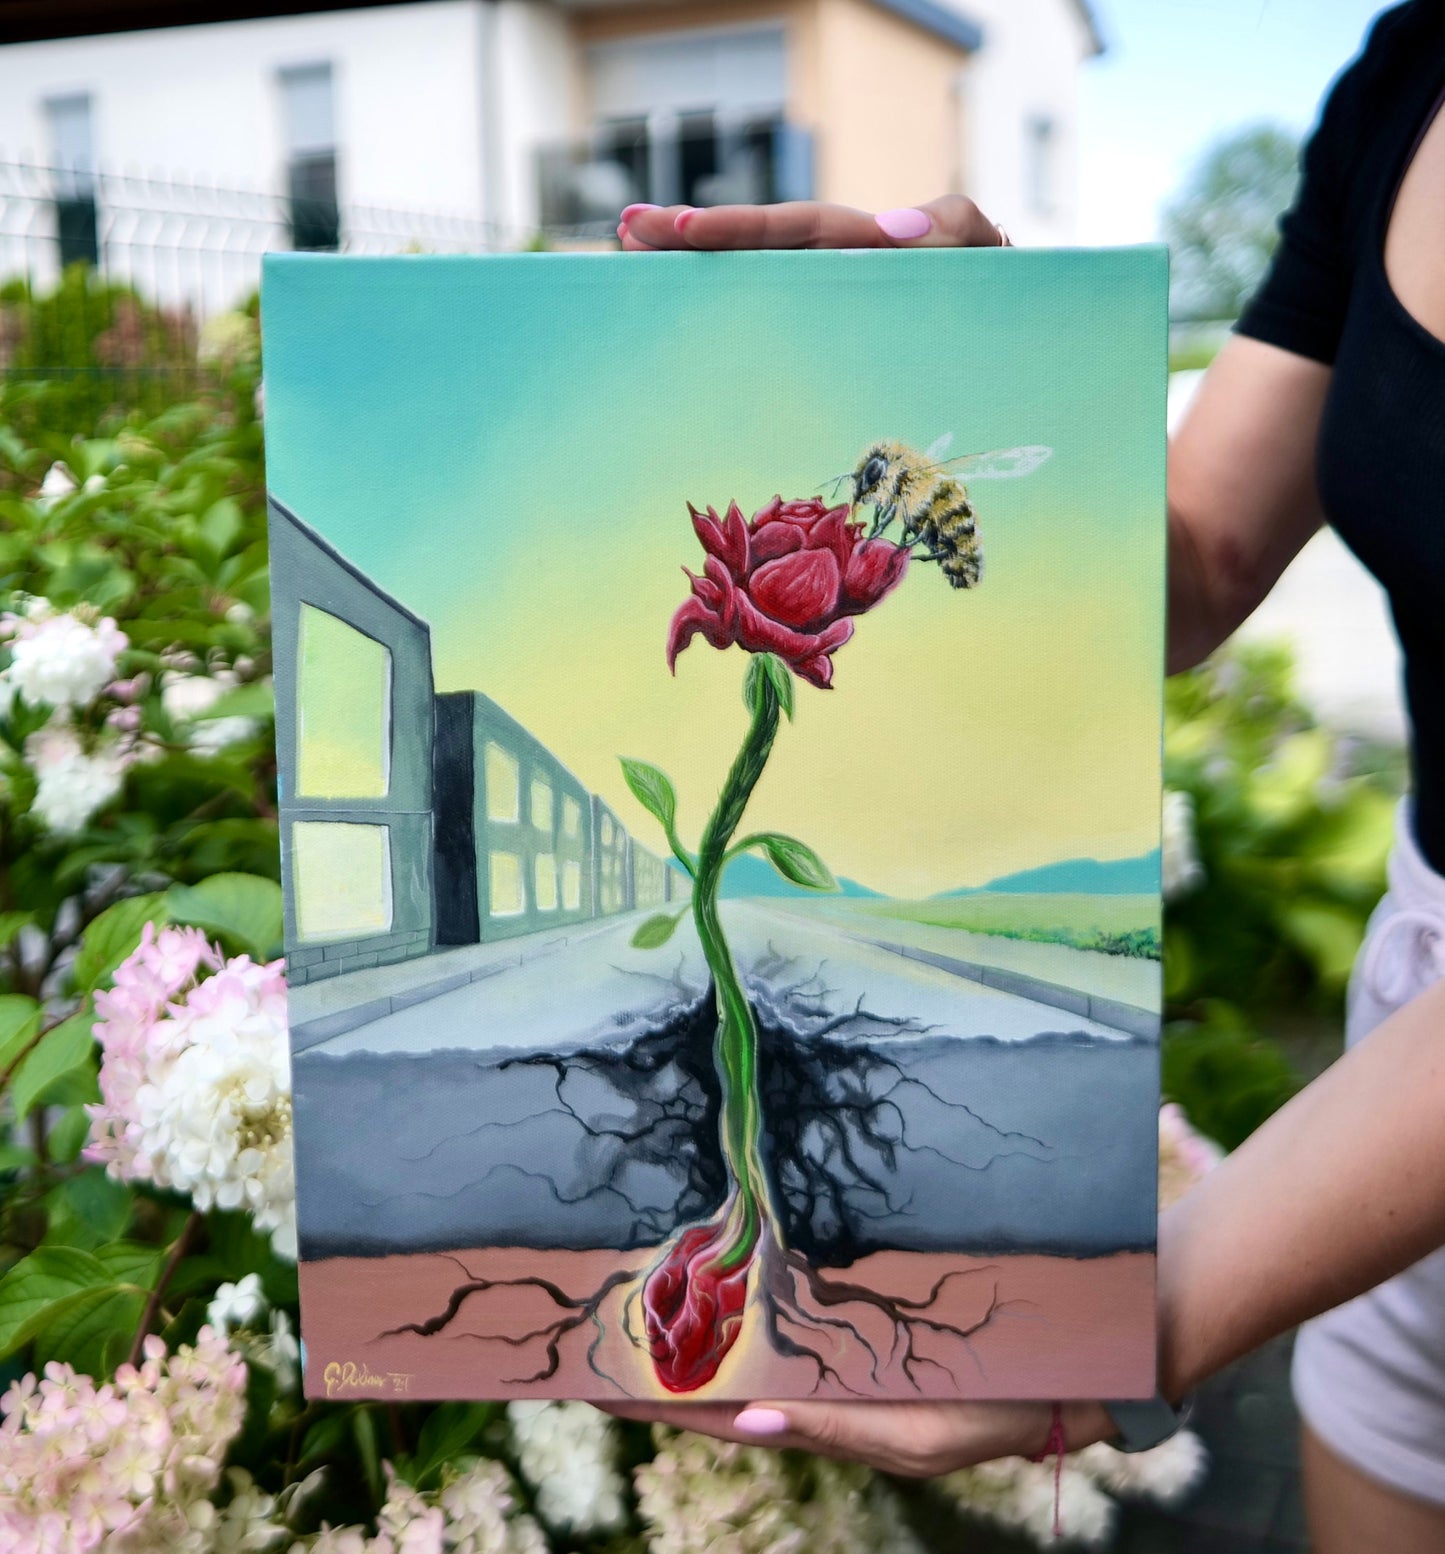 Rose that grew through the concrete - Persistence  Intuitive Original Painting